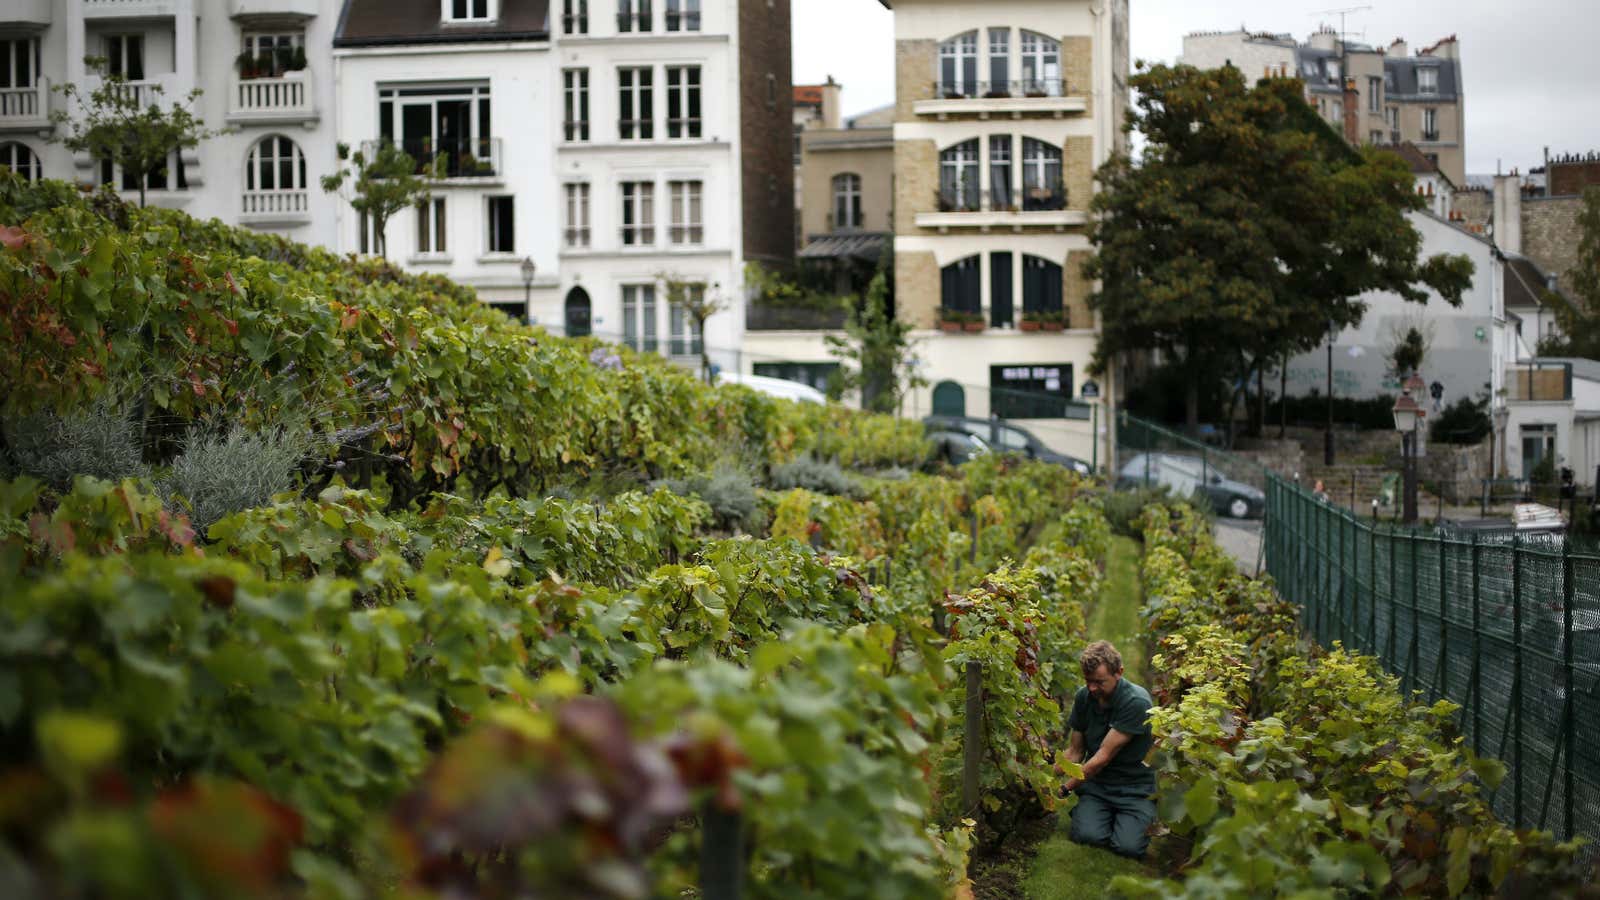 Clos Montmartre, in the shadow of Sacre Coeur.